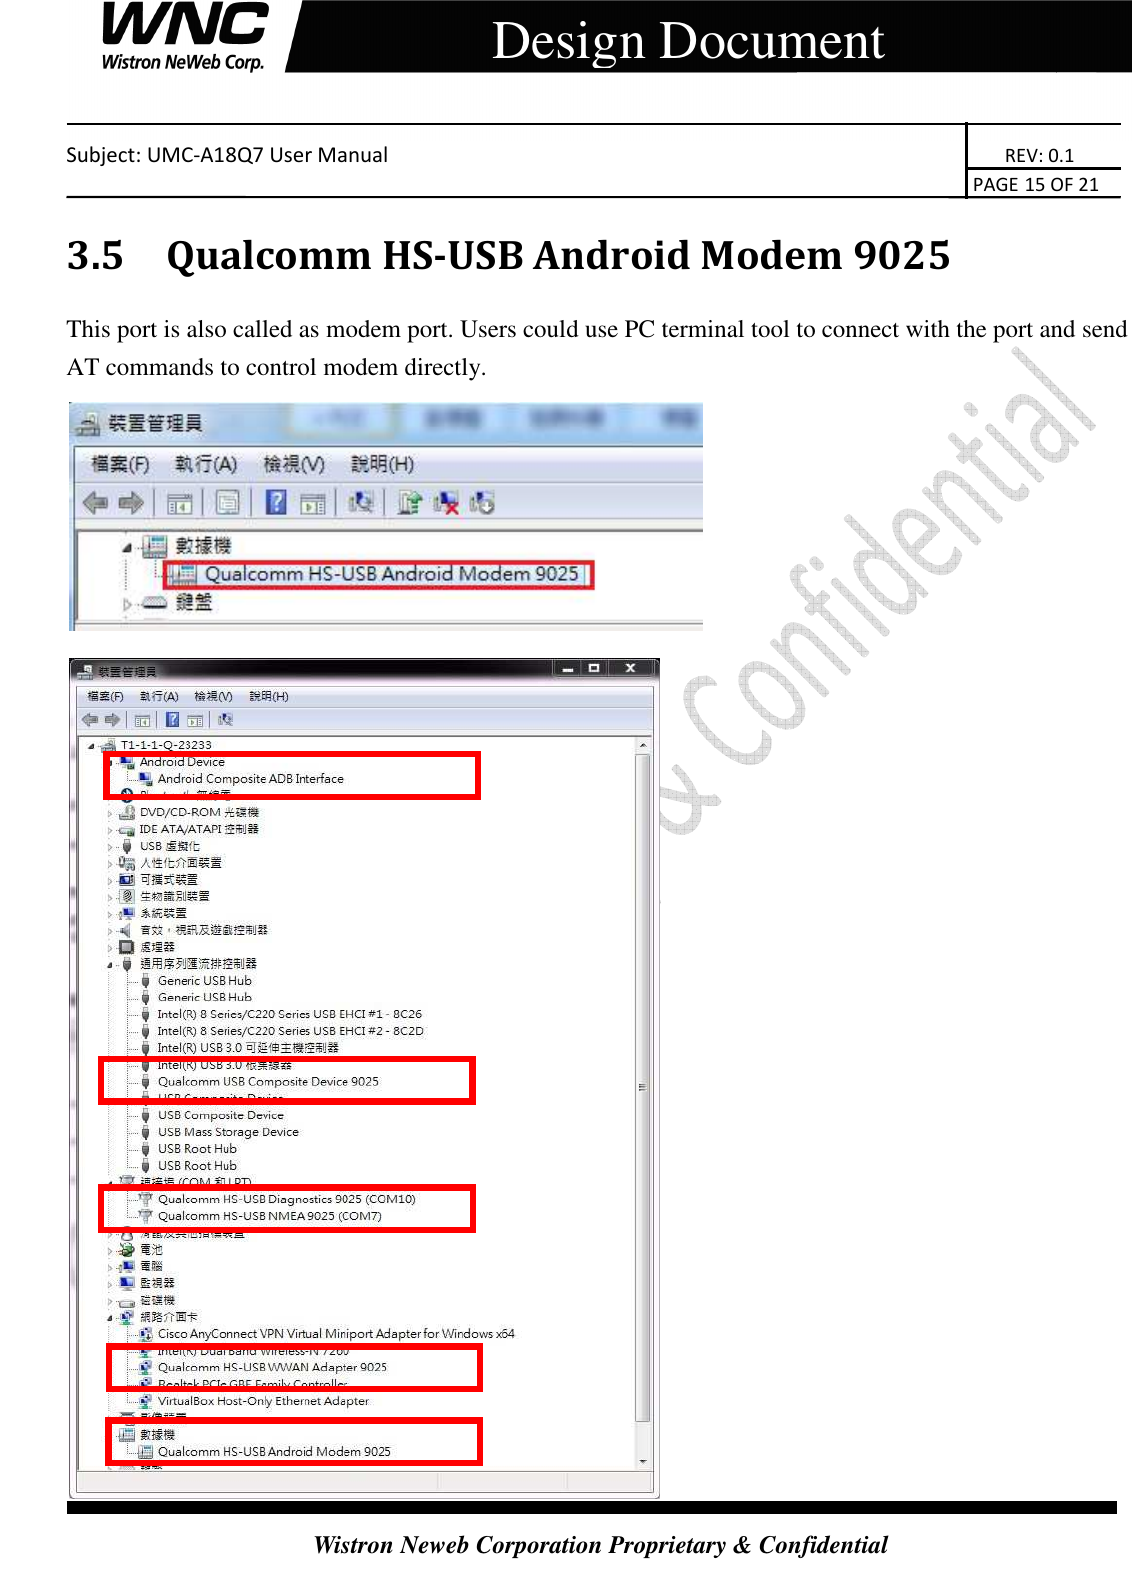    Subject: UMC-A18Q7 User Manual                                                                       REV: 0.1                                                                                                                                                                               PAGE 15 OF 21  Wistron Neweb Corporation Proprietary &amp; Confidential     Design Document 3.5 Qualcomm HS-USB Android Modem 9025 This port is also called as modem port. Users could use PC terminal tool to connect with the port and send AT commands to control modem directly.   